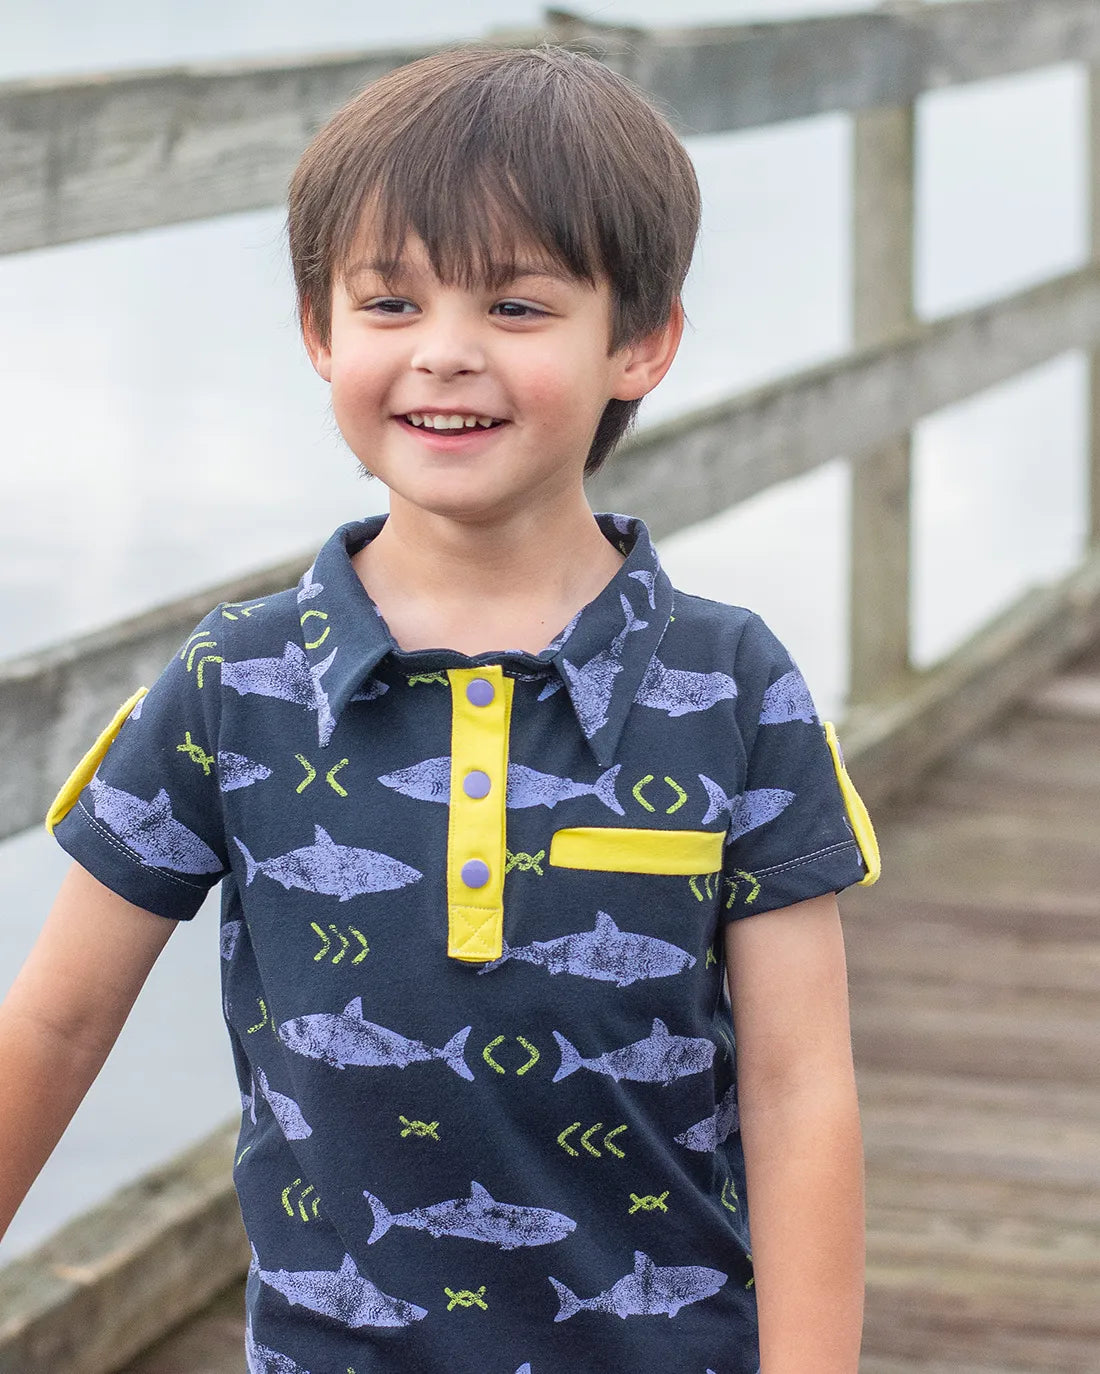 Pine Polo Top Digital Sewing Pattern